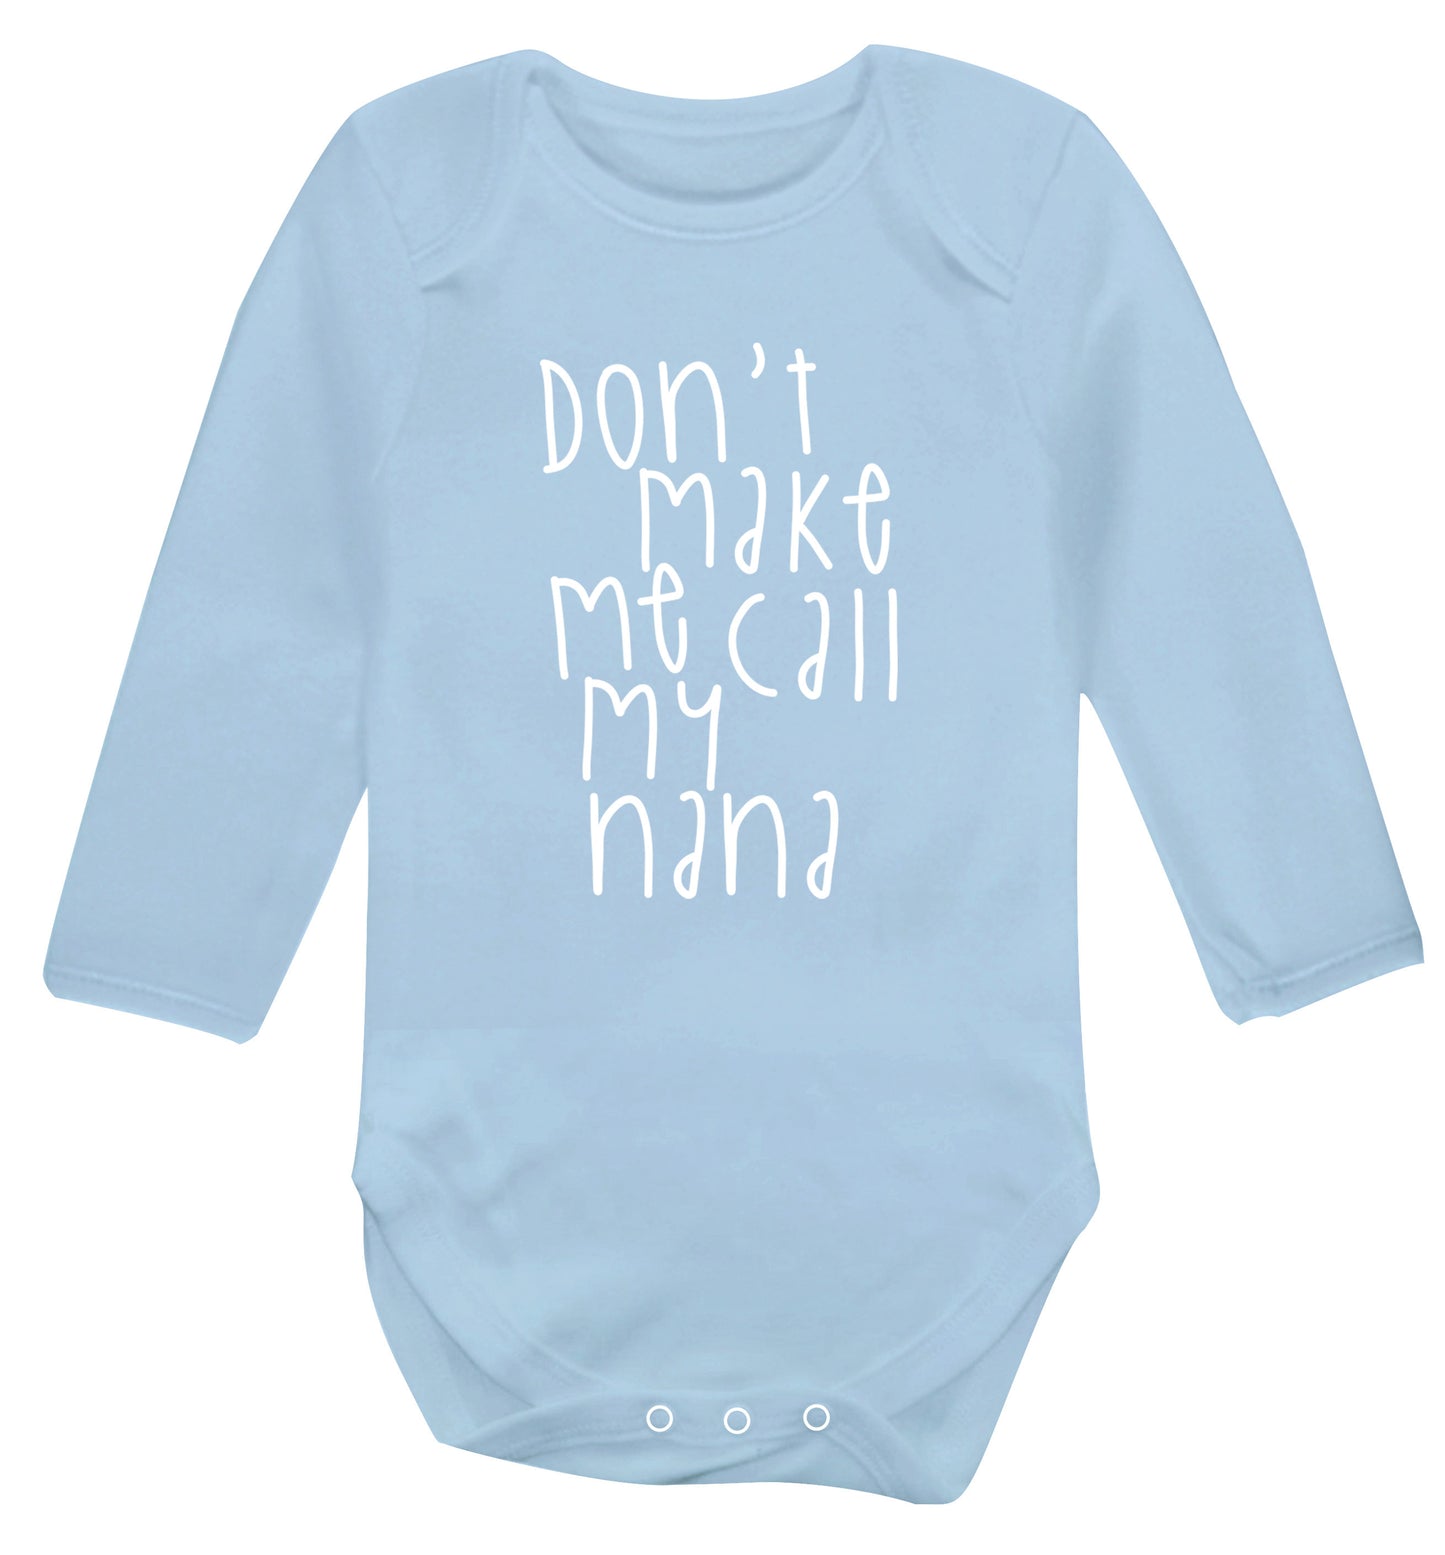 Don't make me call my nana Baby Vest long sleeved pale blue 6-12 months